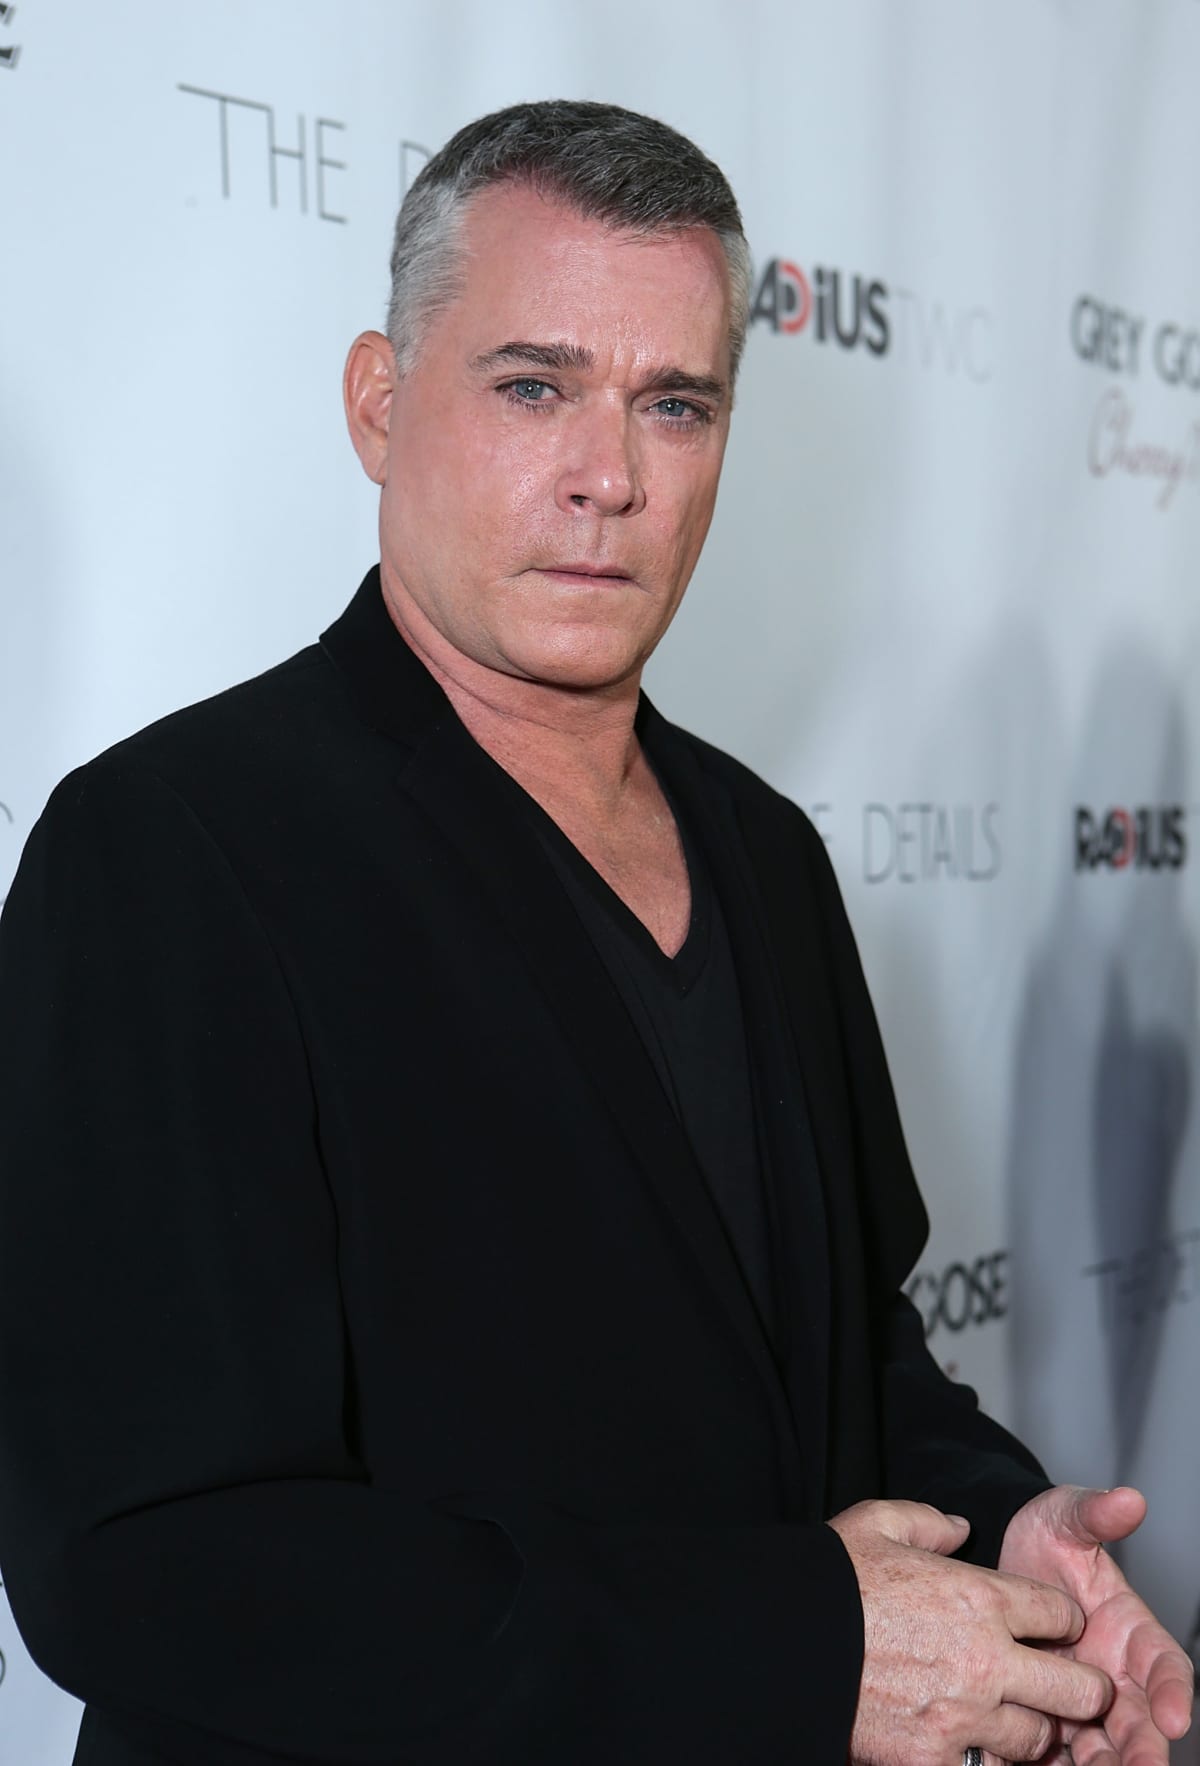 HOLLYWOOD, CA - OCTOBER 29:  Ray Liotta at RADiUS-TWC 'he Details' Premiere hosted by GREY GOOSE Vodka held at The ArcLight Cinemas on October 29, 2012 in Hollywood, California.  (Photo by Alexandra Wyman/Getty Images for Grey Goose)